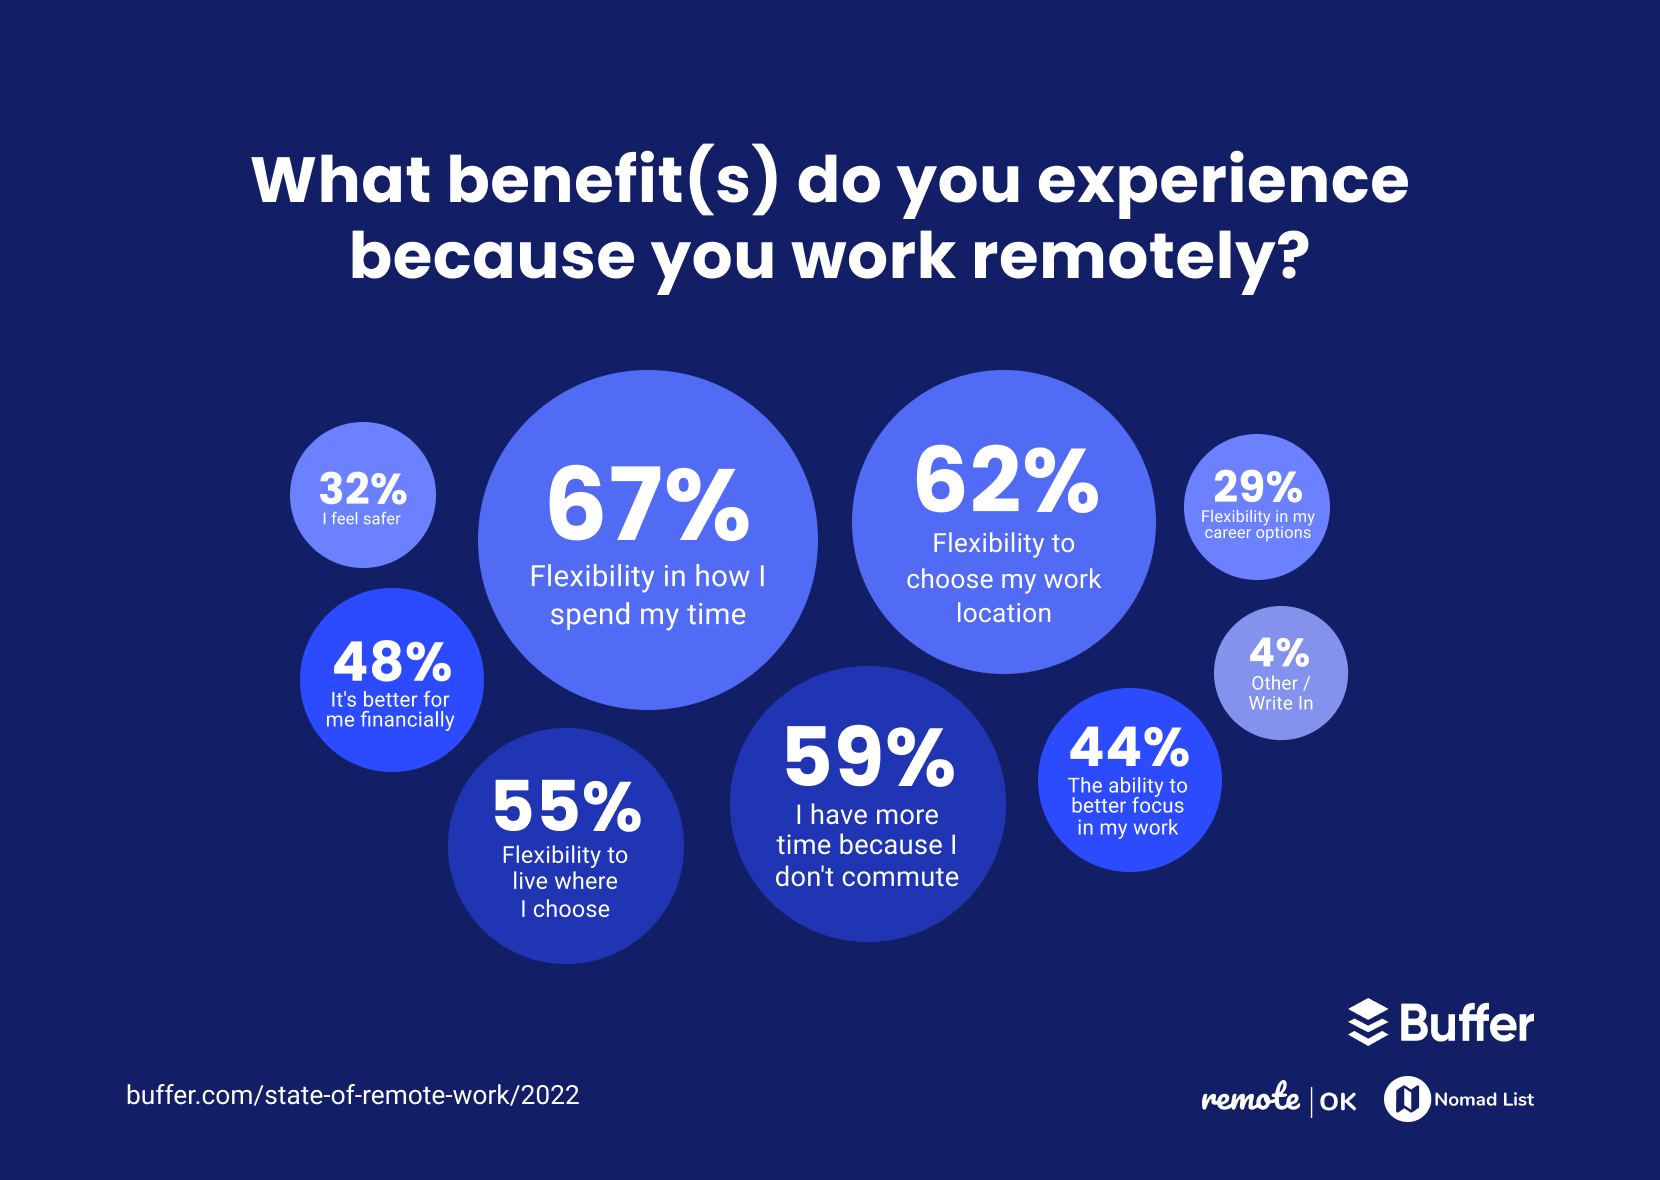 What benefit(s) do you experience because you work remotely?